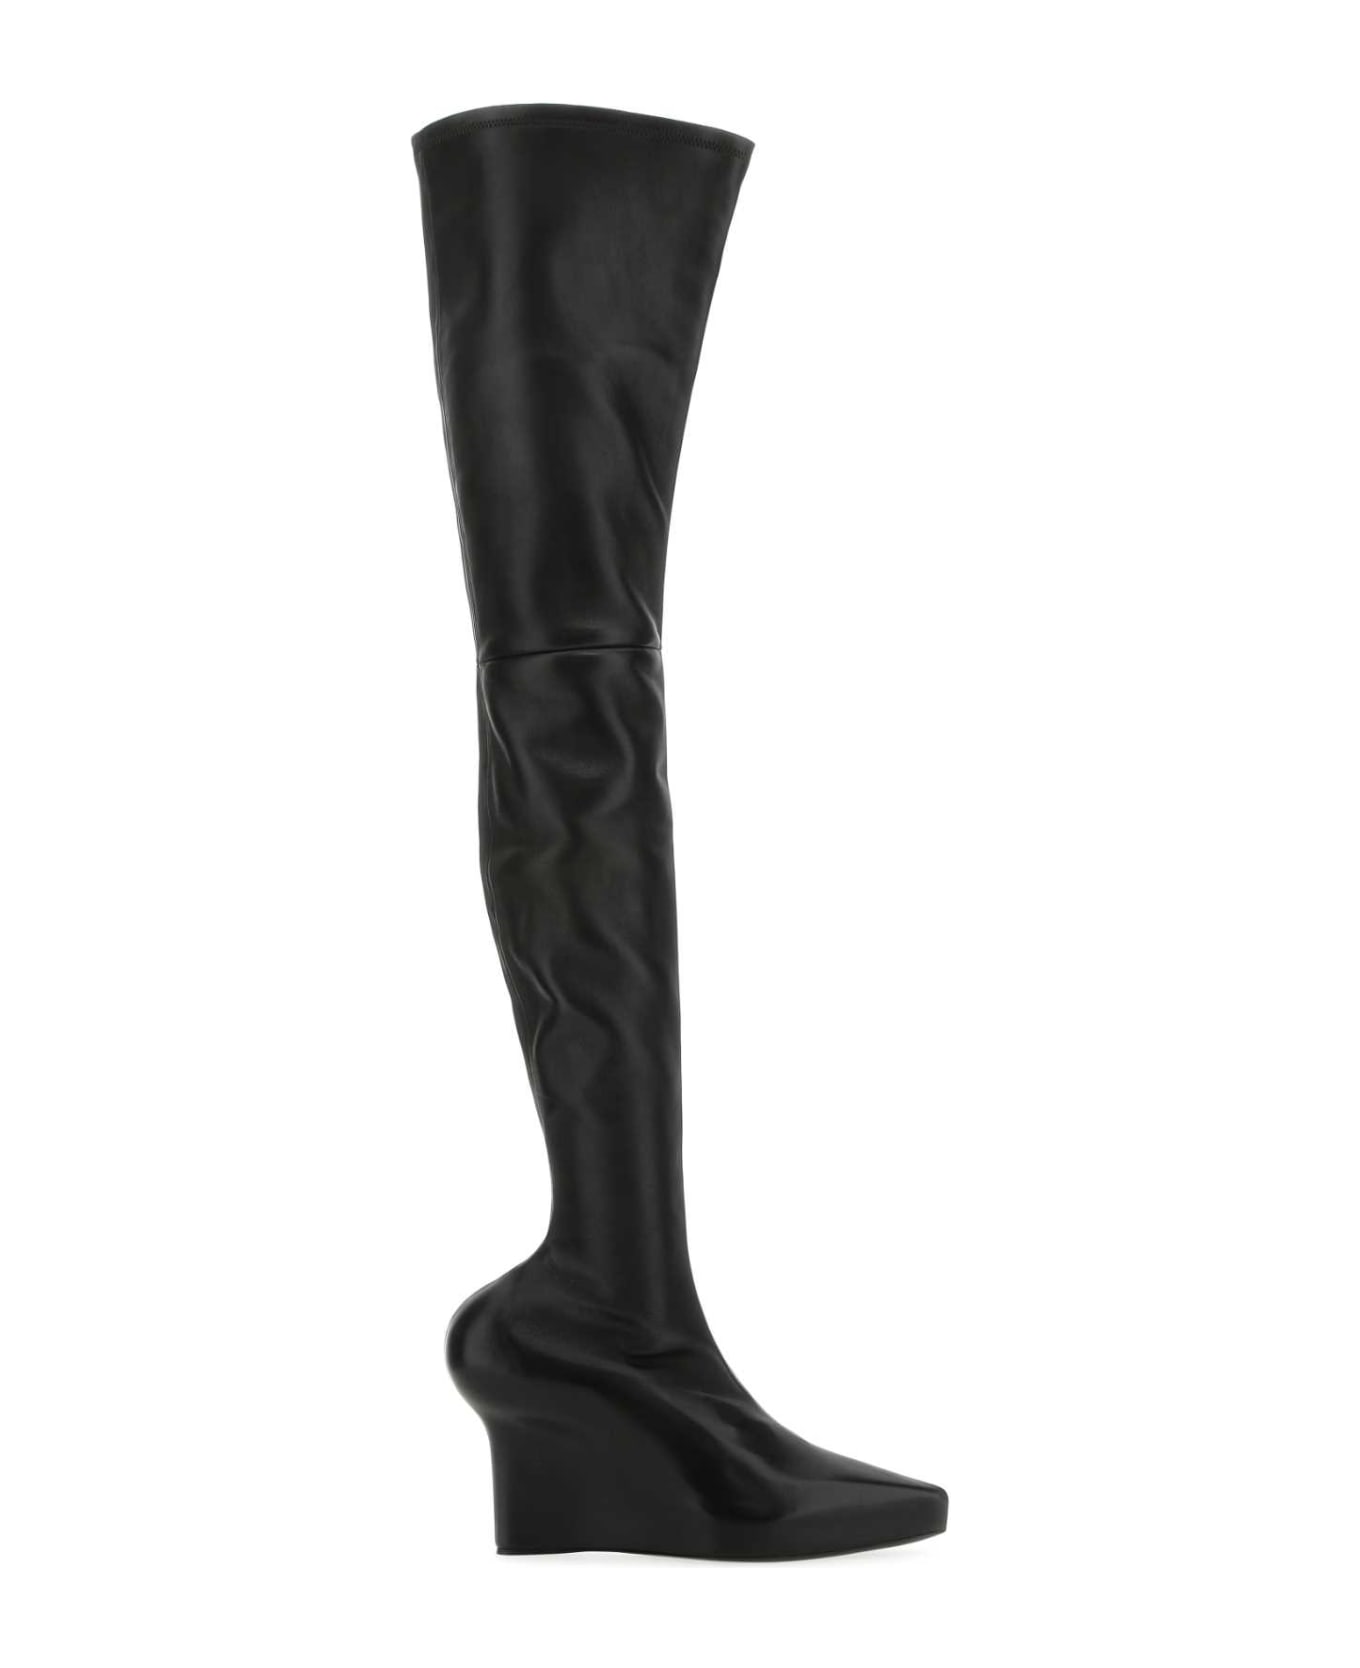 Givenchy Black Nappa Leather Show Boots - 001